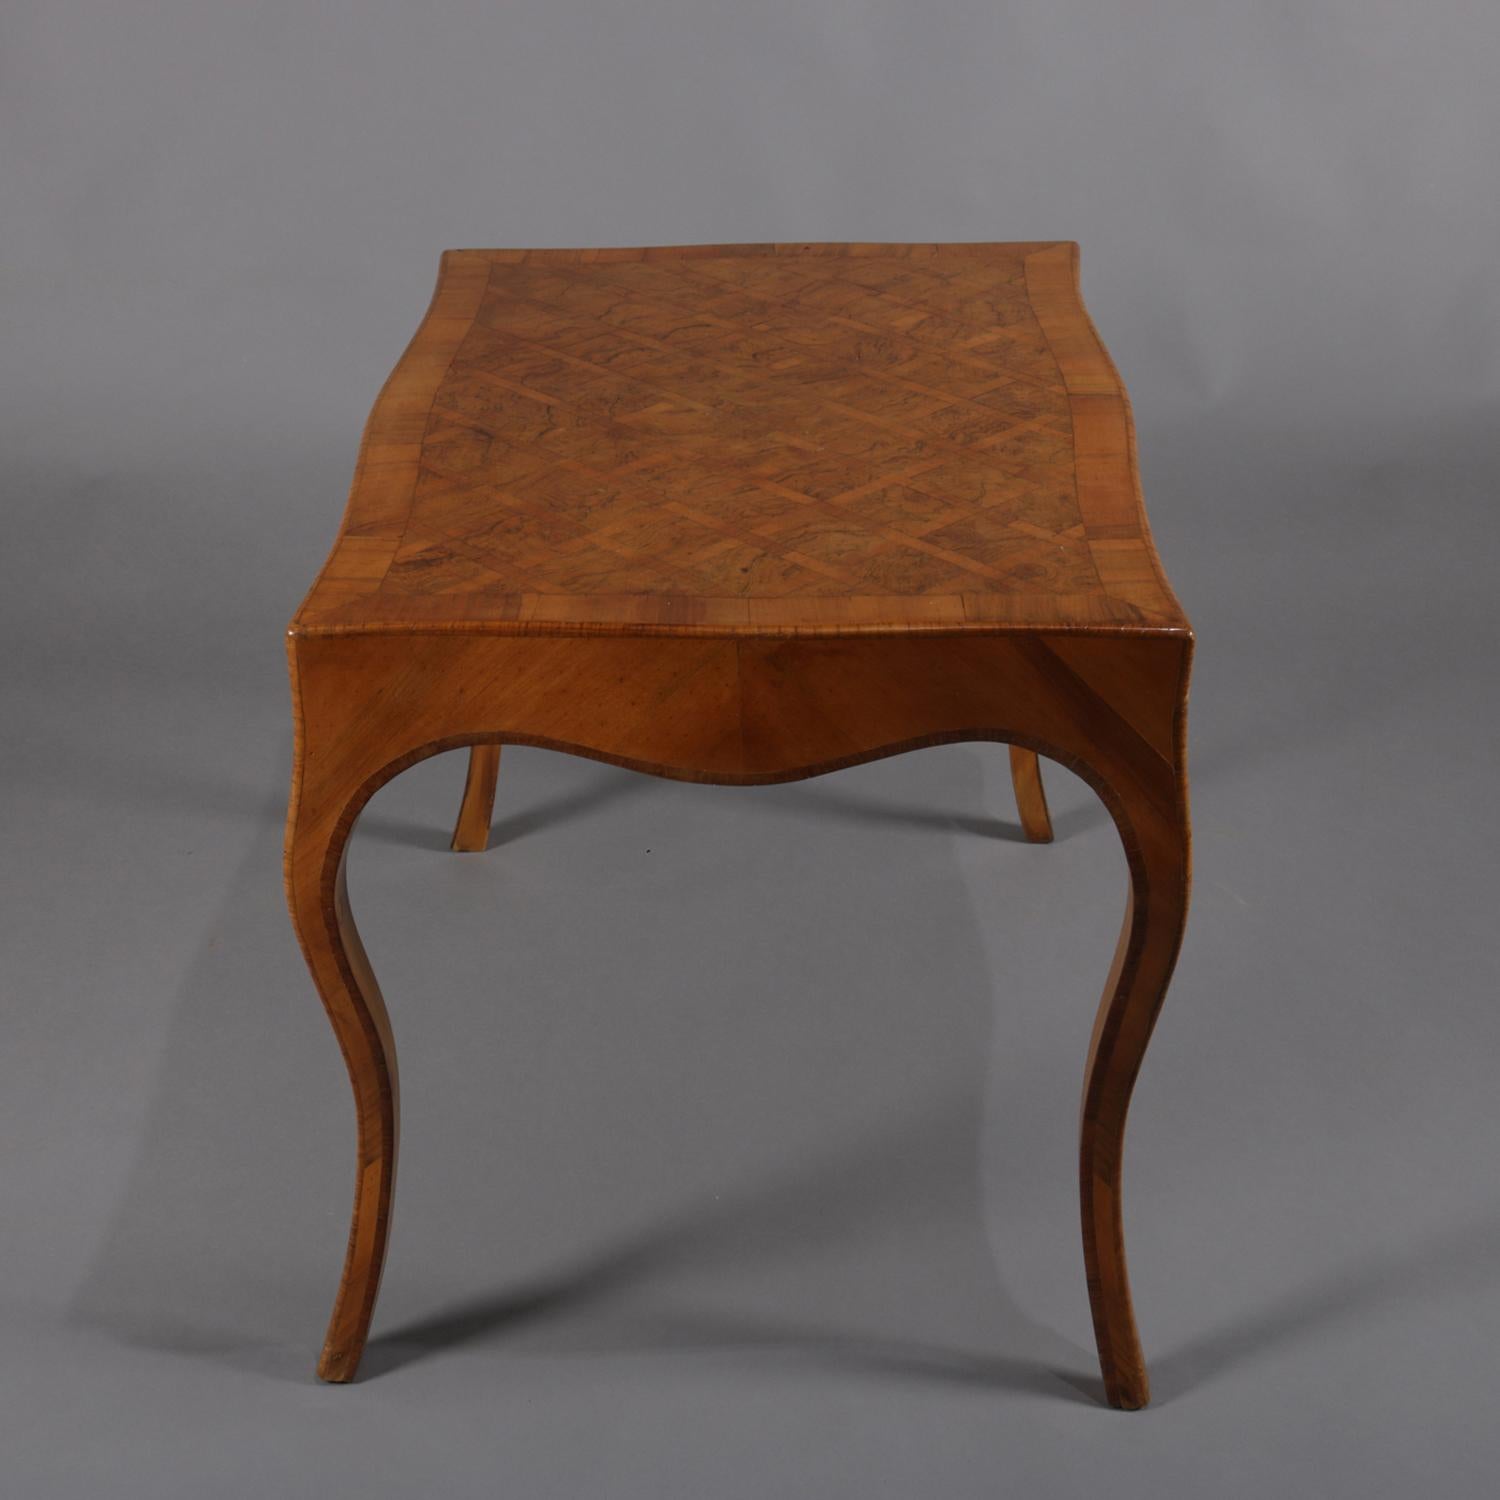 Inlay Antique Italian Parquetry Inlaid Mahogany Low Centre Cocktail Table 19th Century